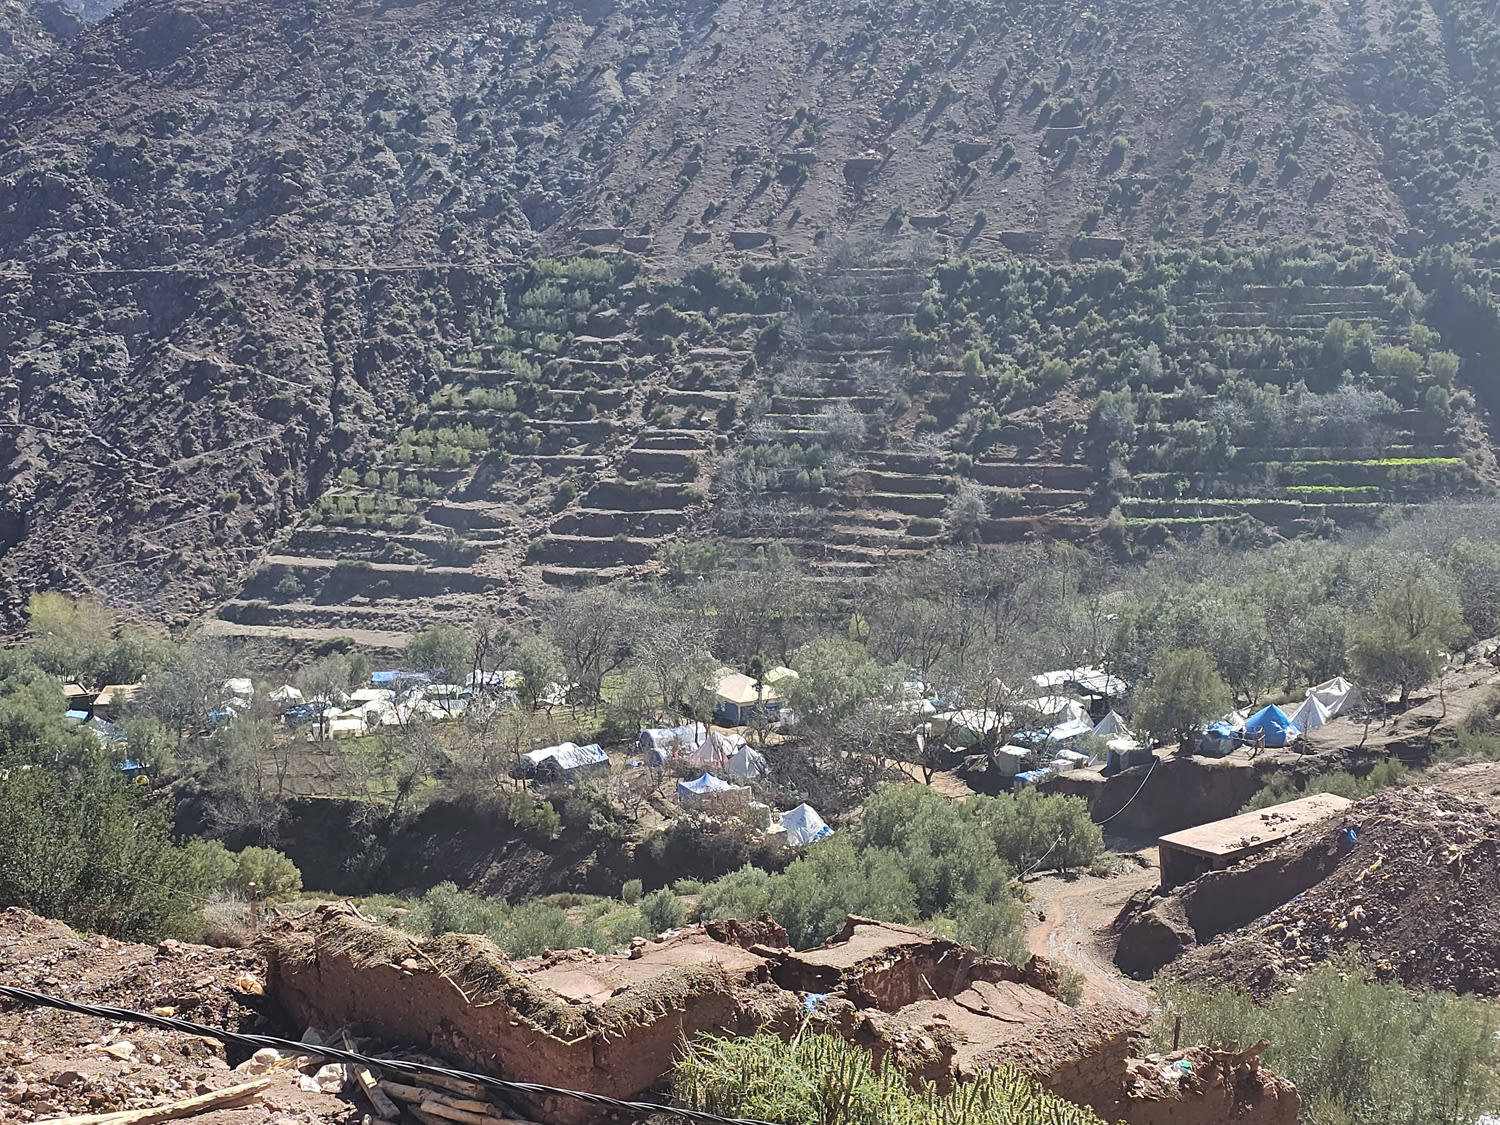 Temporary accommodation set up in Imi Oughlad in Morocco's High Atlas Mountains